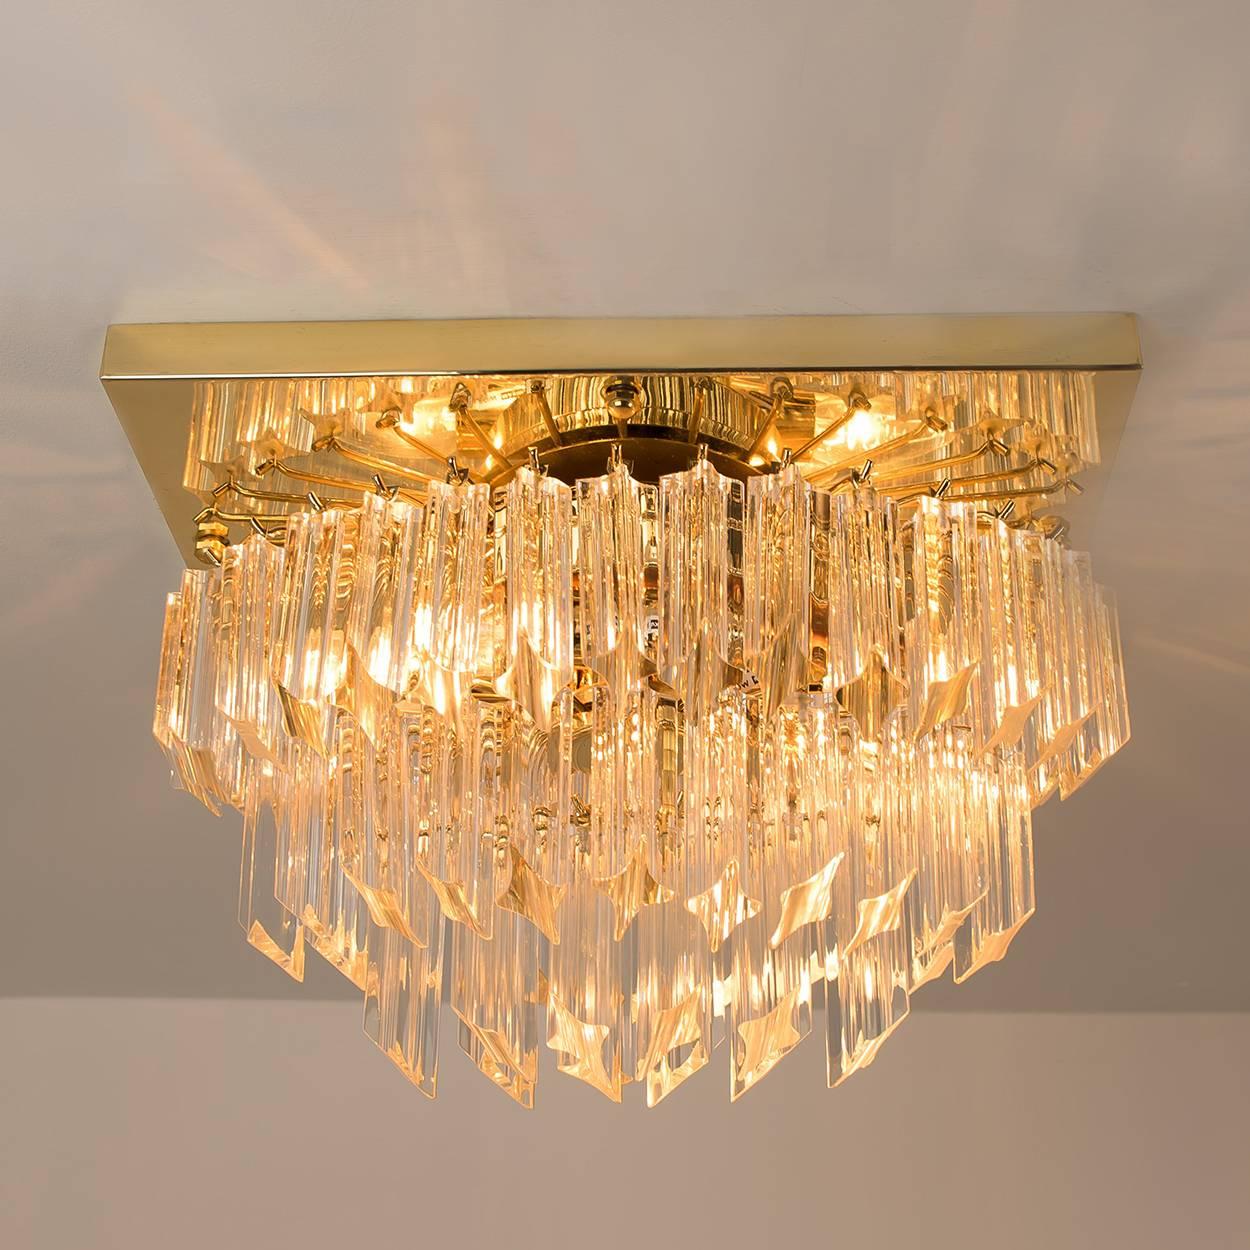 This stylish three-tiered faceted Murano flush mount with 58 clear crystal glass prisms was designed and produced by Venini in Italy from the 1970s. The Venin Murano prisms are suspended on a square gold-plated frame. The prisms sparkle with the